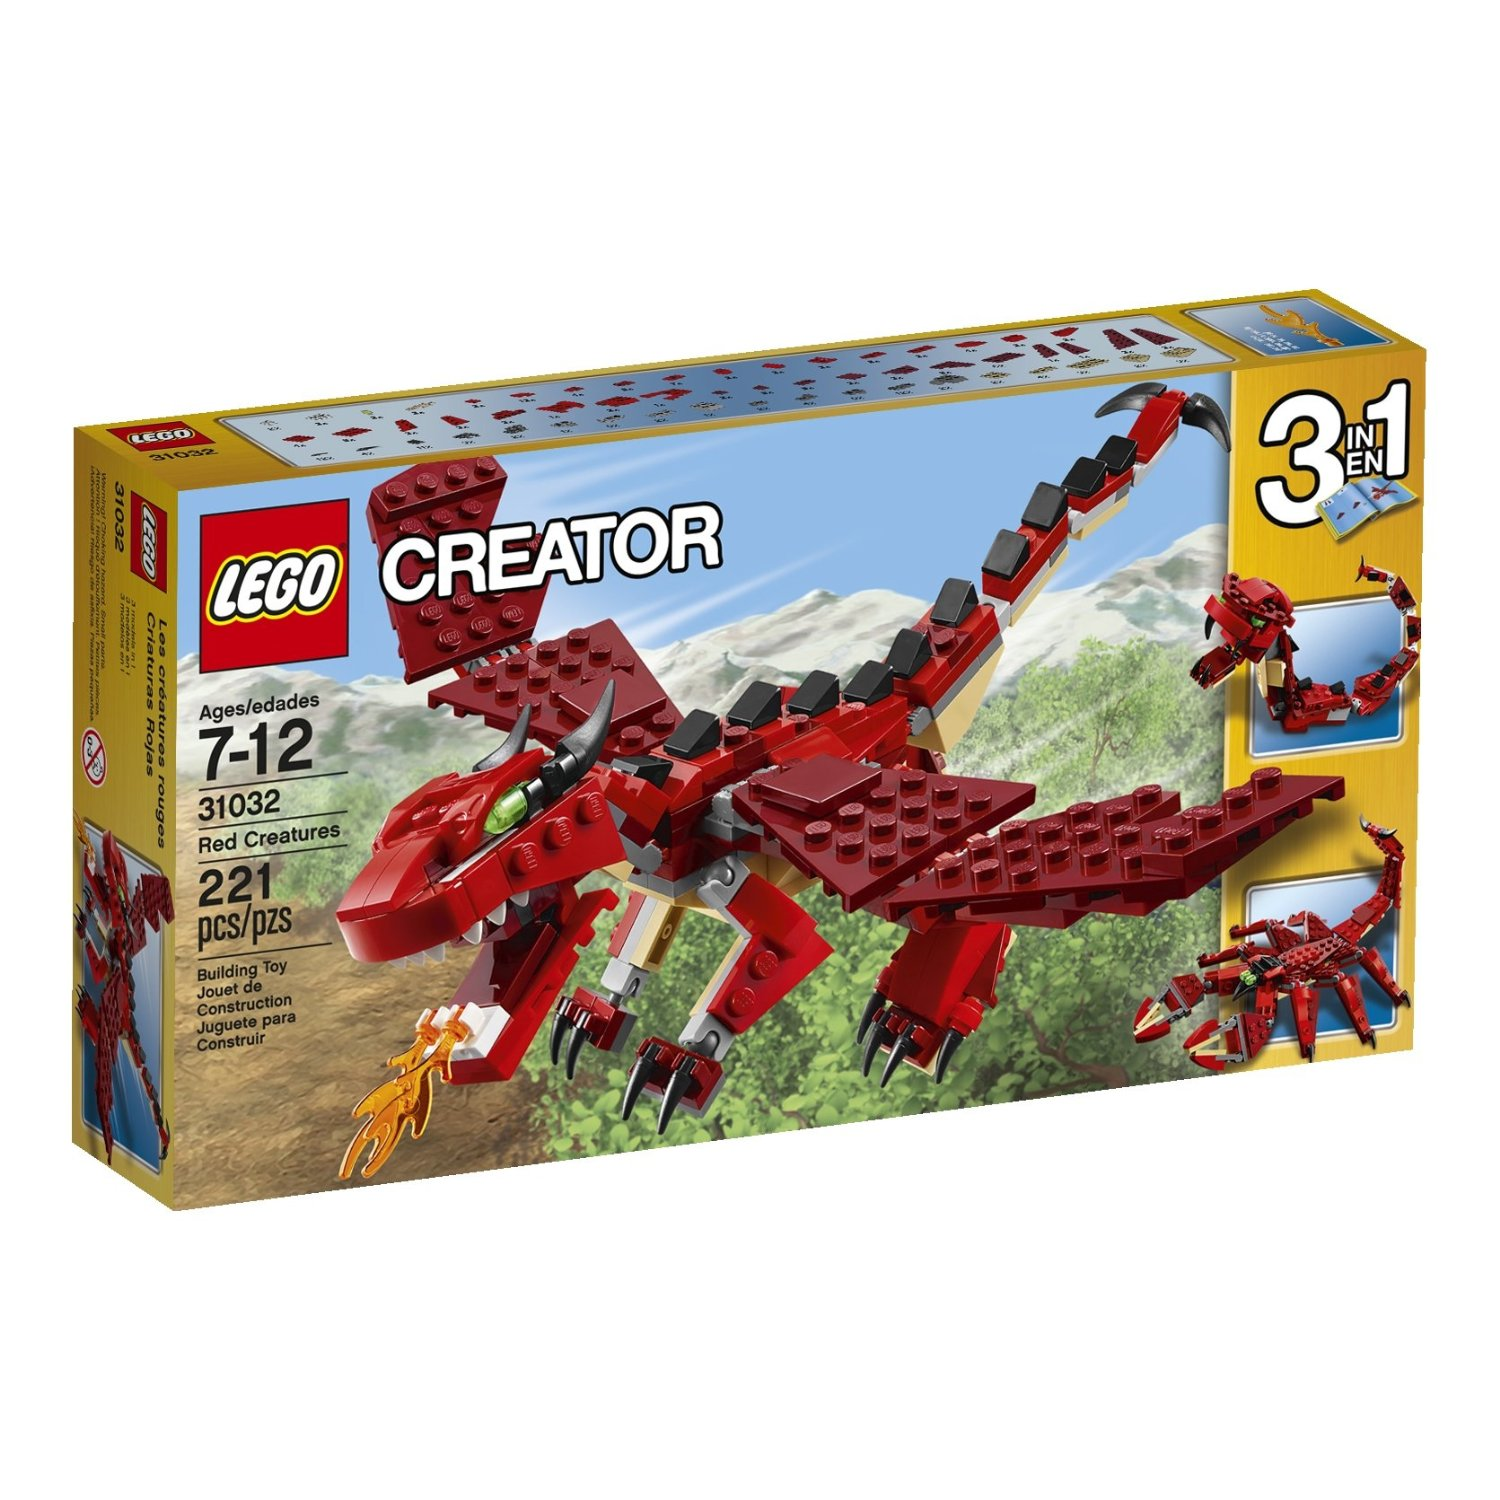 LEGO Creator Red Creatures Only $10.99 on Amazon!